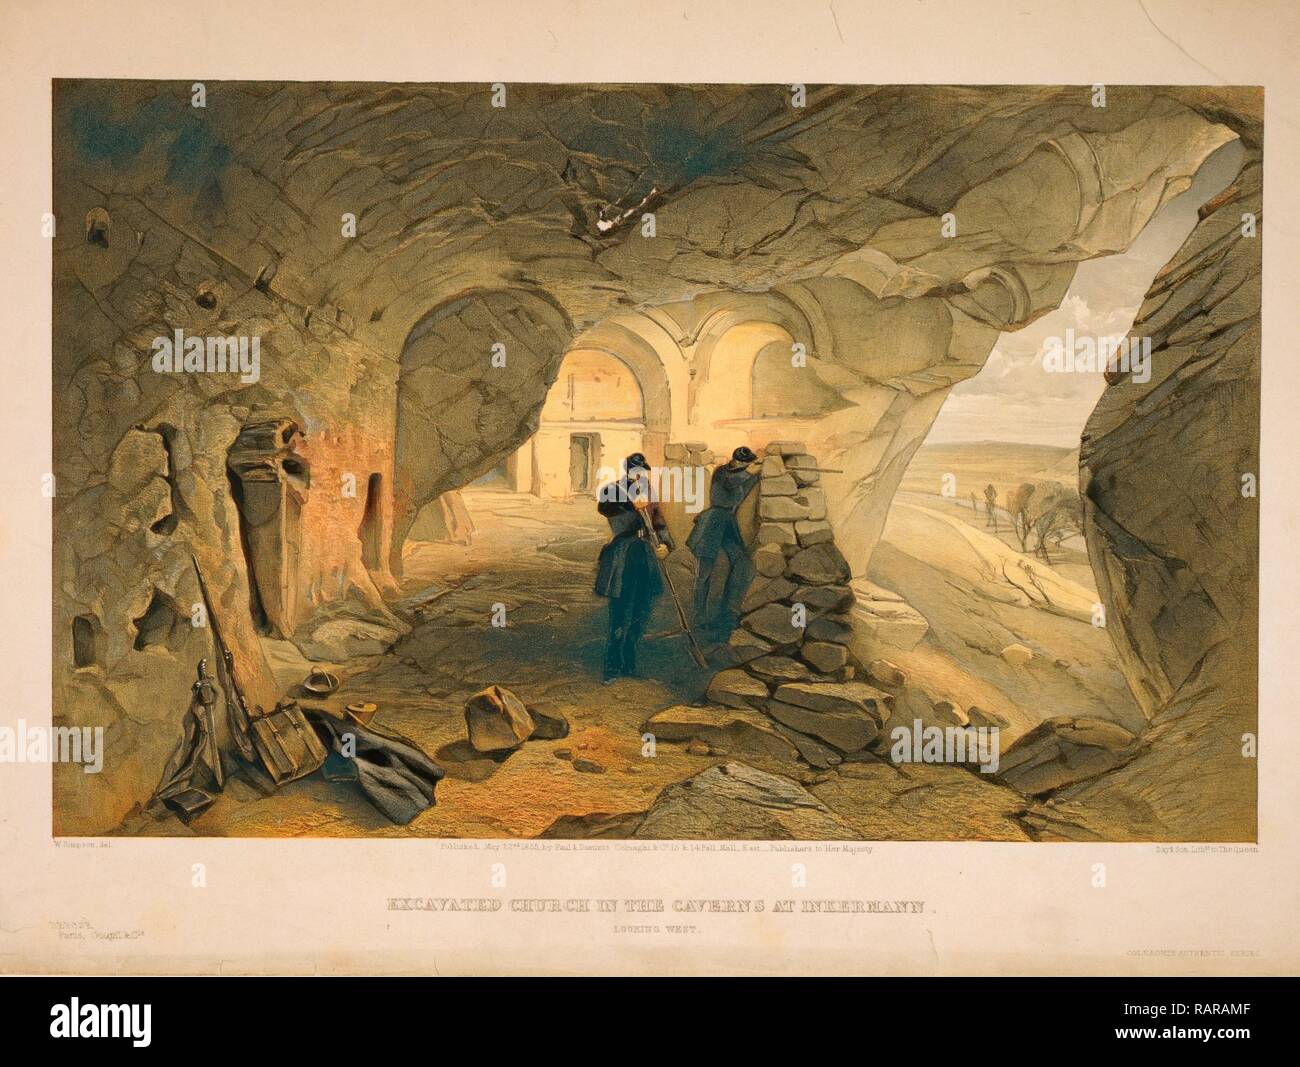 Excavated church in the caverns at Inkermann, looking west / W. Simpson, del., Day & Son, Lithrs. to the Queen., Day reimagined Stock Photo